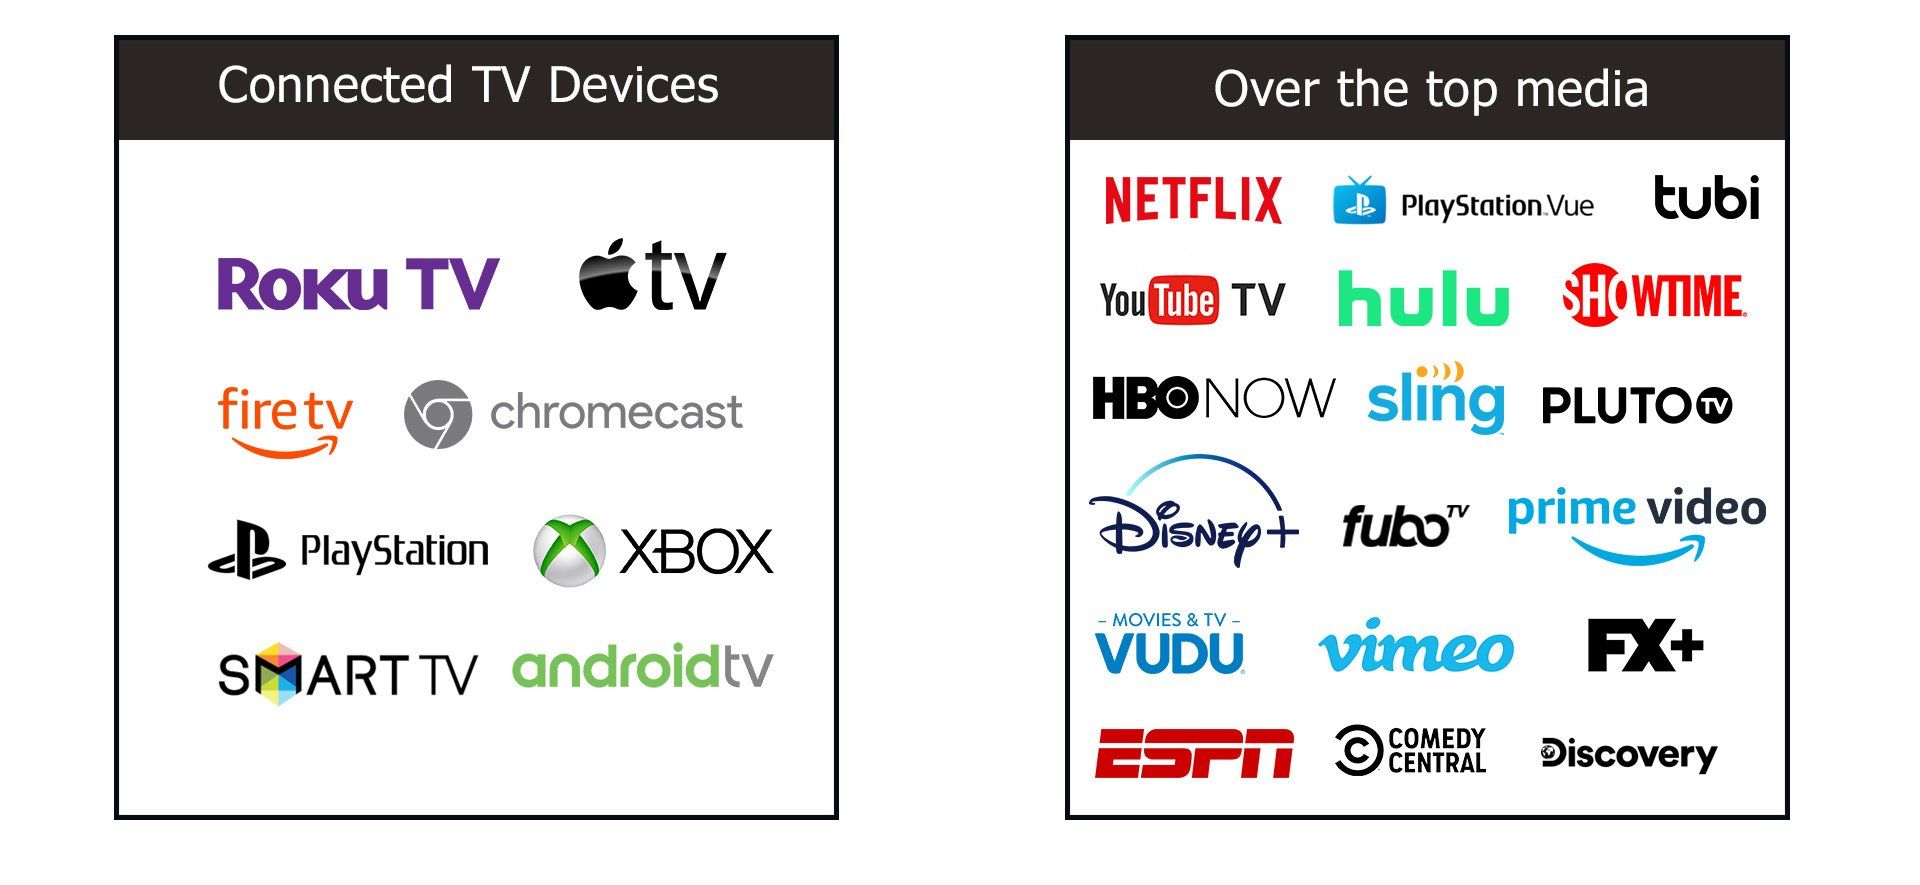 Two charts show the difference been Connected TV devices and OTT content, showcasing the importance of CTV/OTT ads and Connected TV marketing.